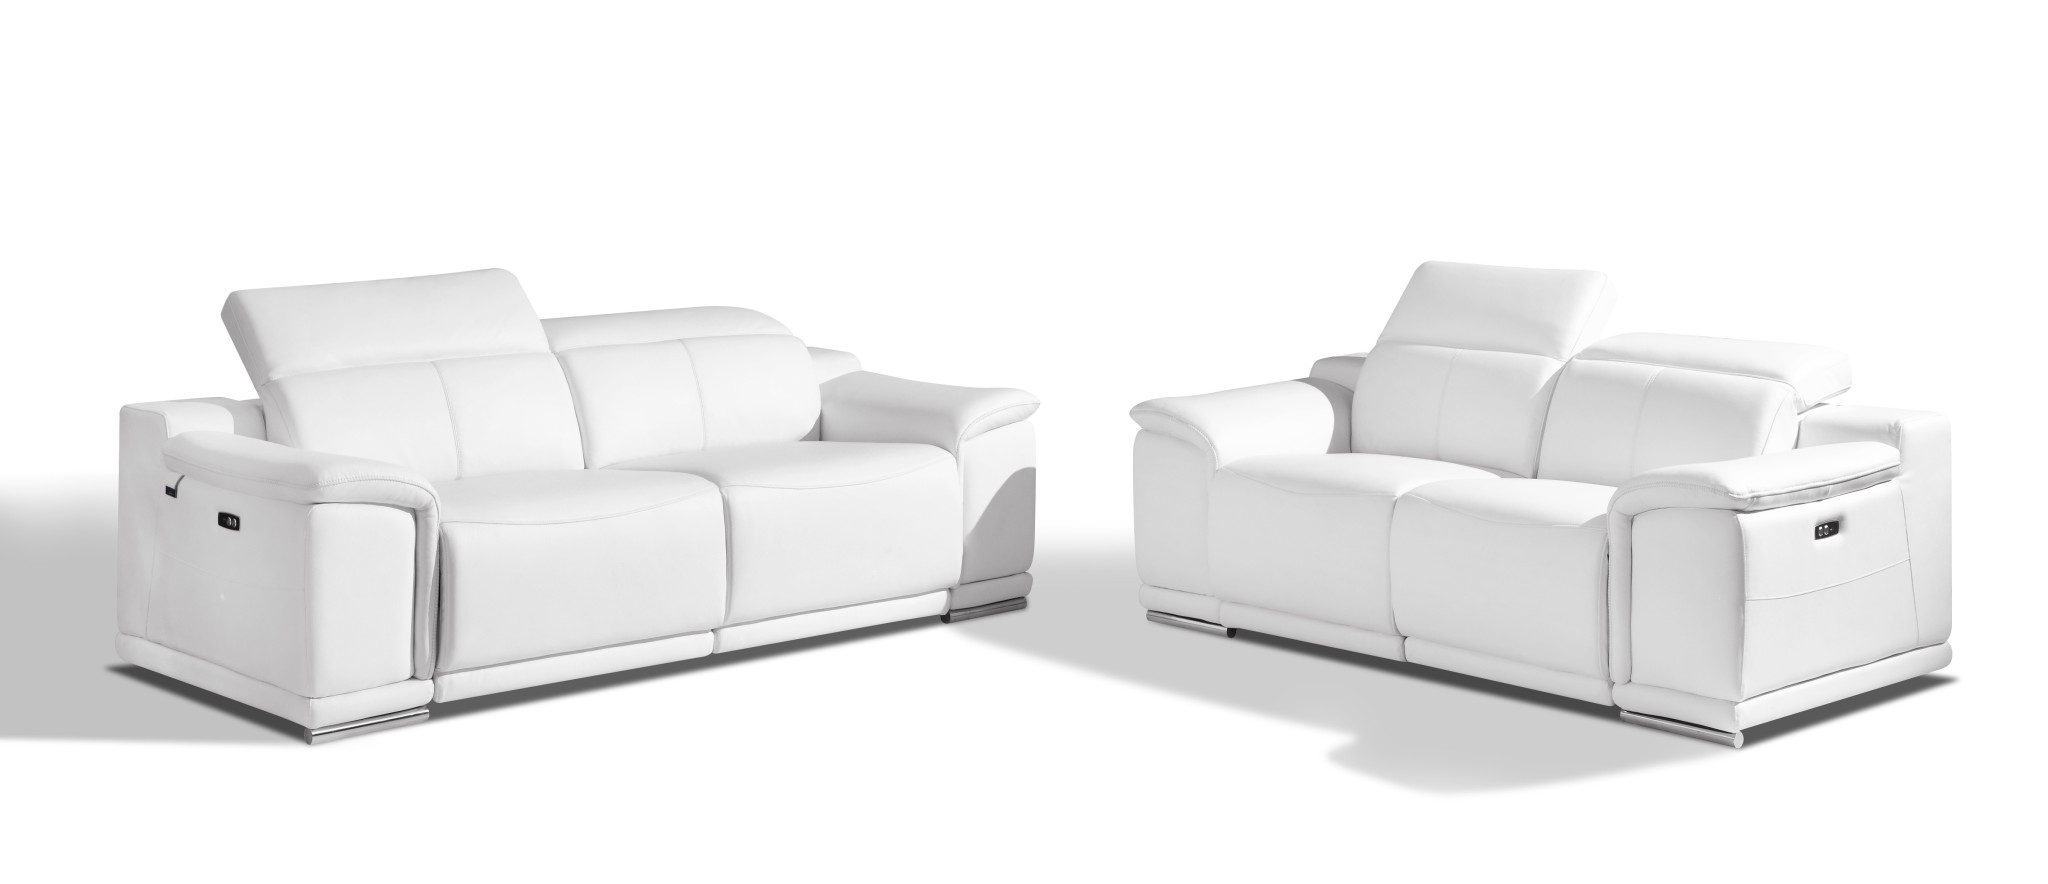 Two Piece Indoor White Italian Leather Five Person Seating Set-476559-1